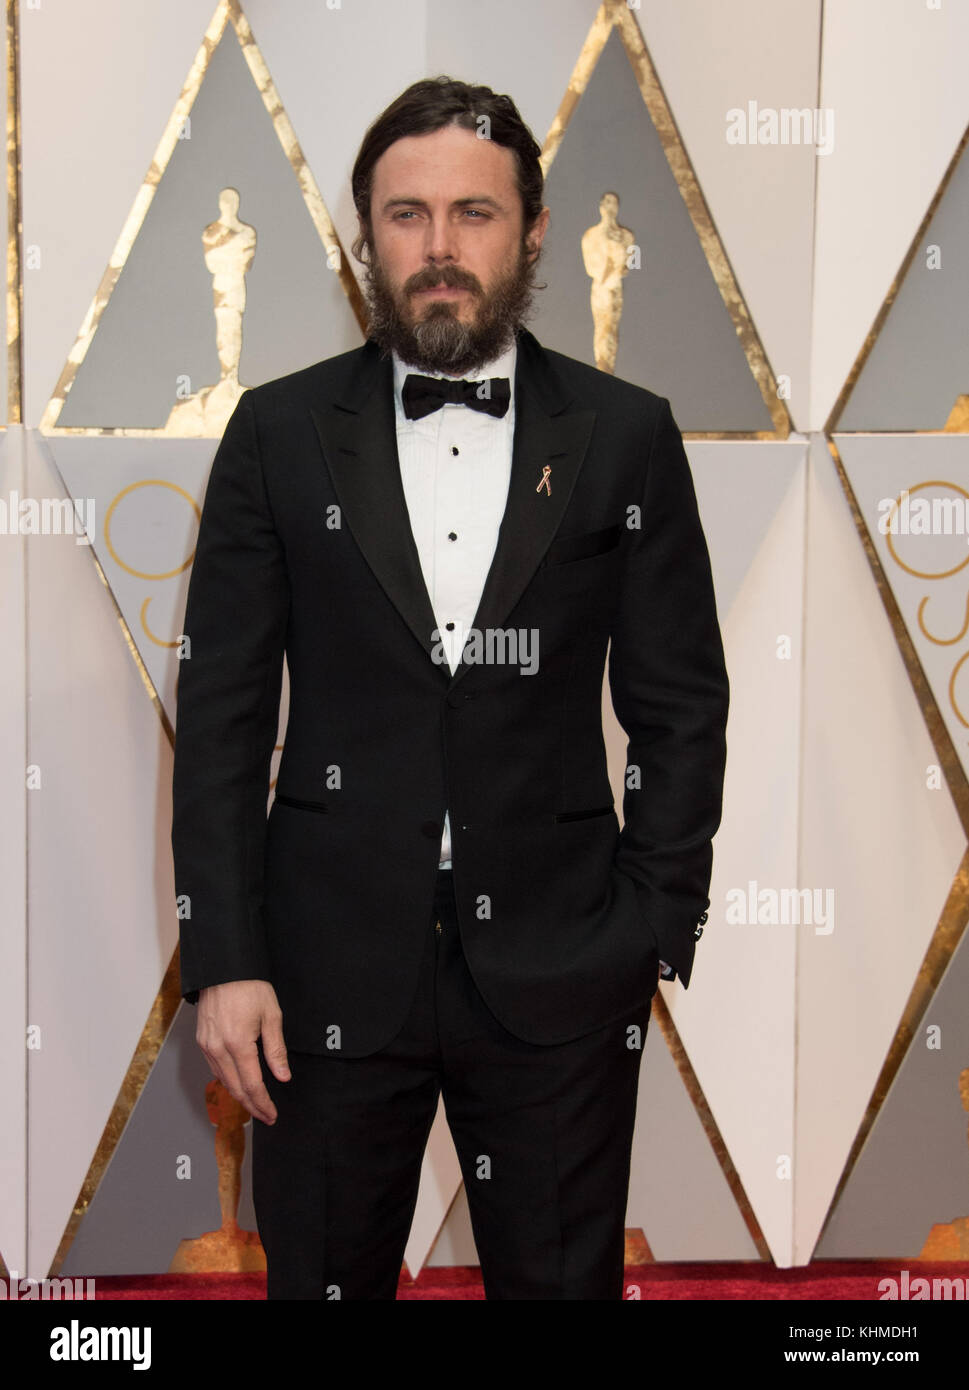 HOLLYWOOD, CA - FEBRUARY 26: Casey Affleck attends the 89th Annual Academy Awards at Hollywood & Highland Center on February 26, 2017 in Hollywood, California  People:  Casey Affleck  Transmission Ref:  MNC Stock Photo